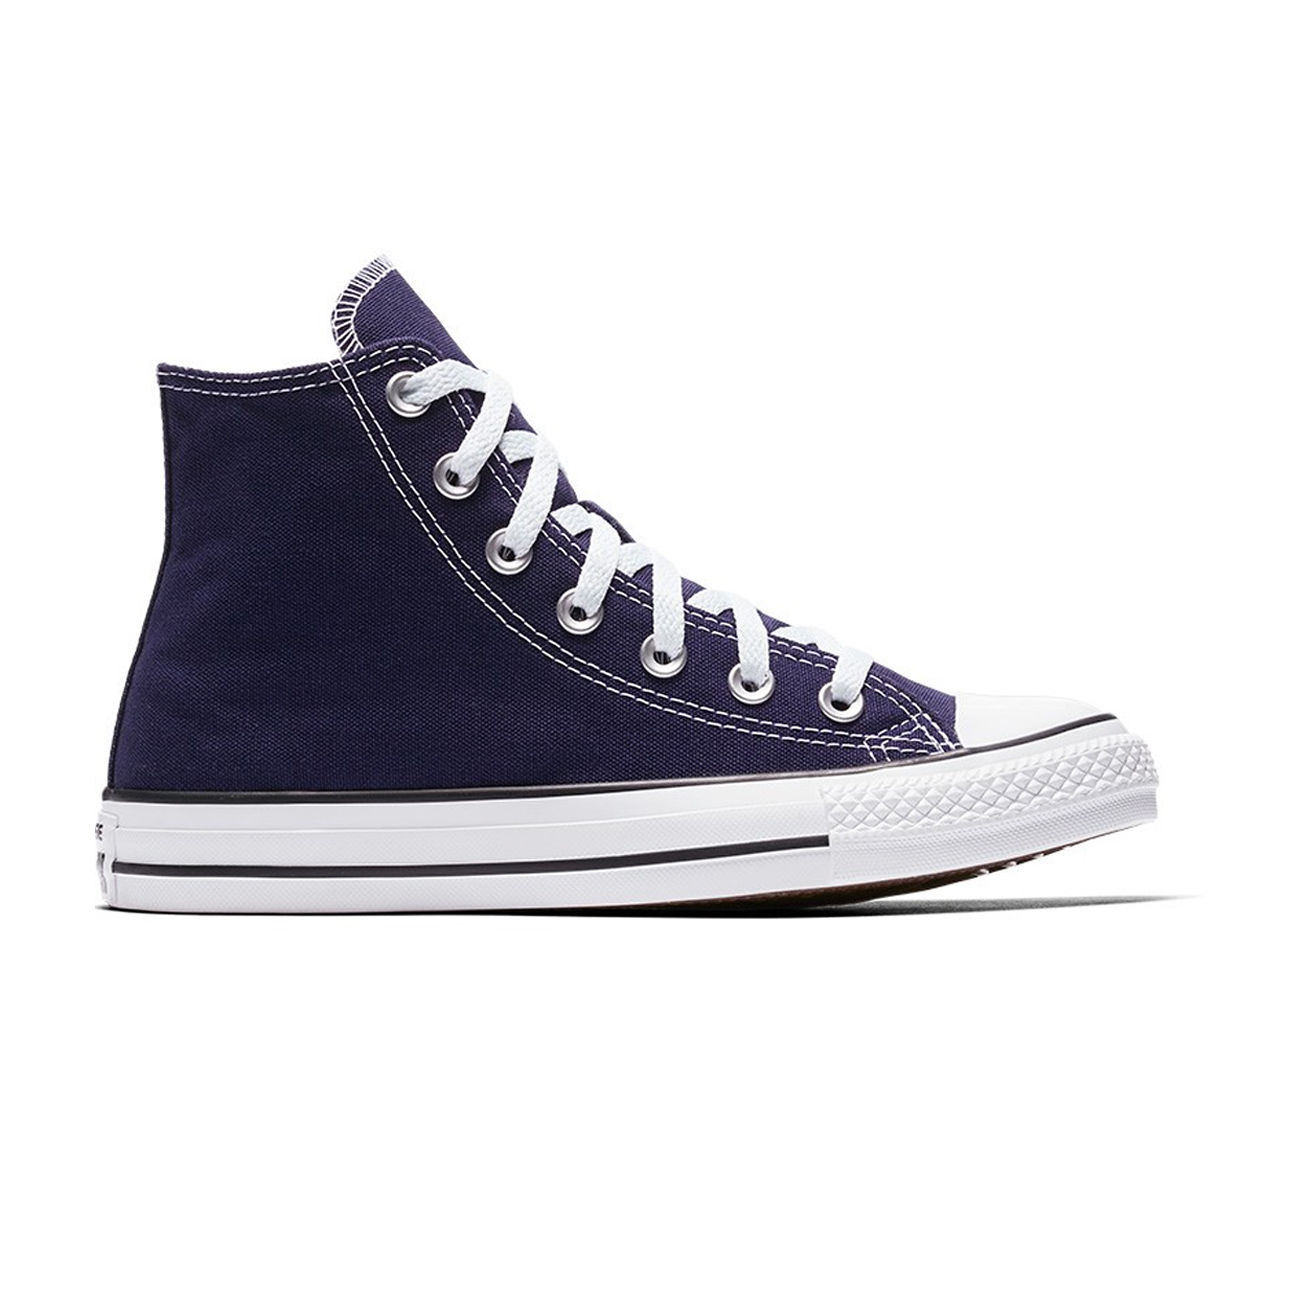 Update more than 136 womens blue converse sneakers best